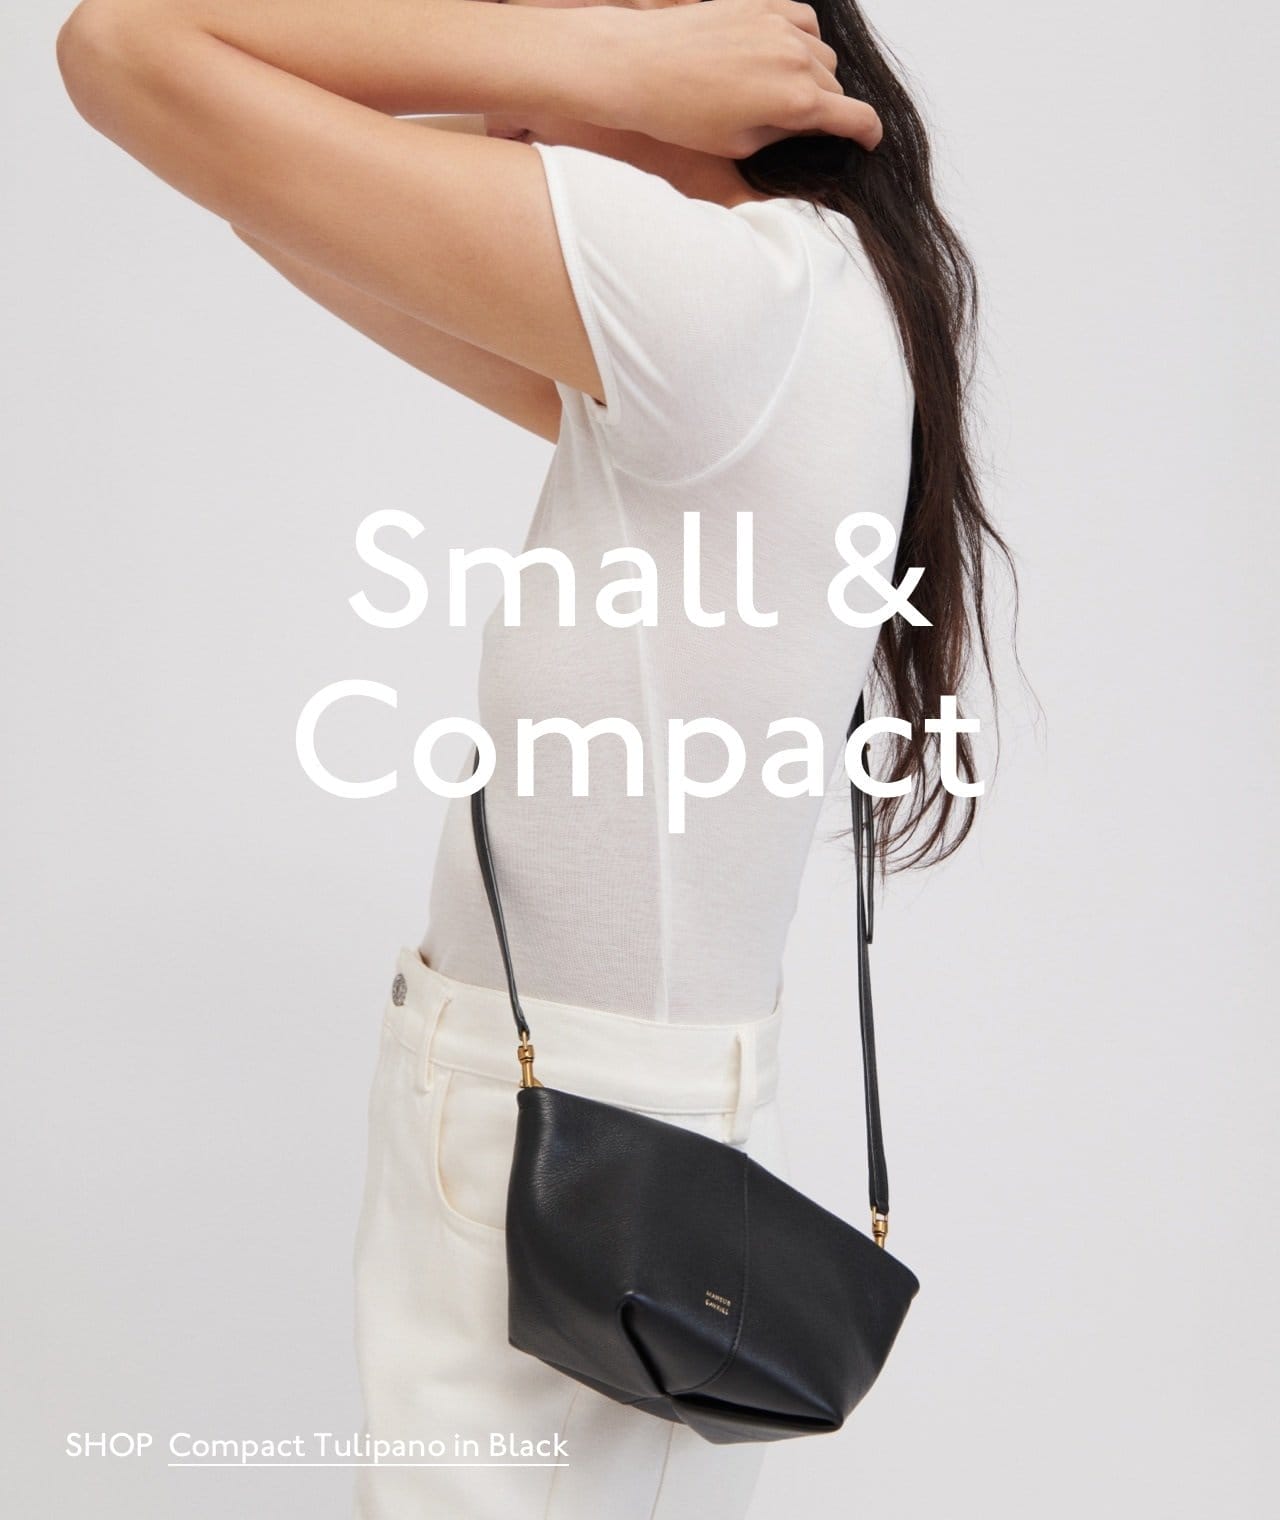 Designed to be just the right size for your daily essentials, our Compact Tulipano is back.